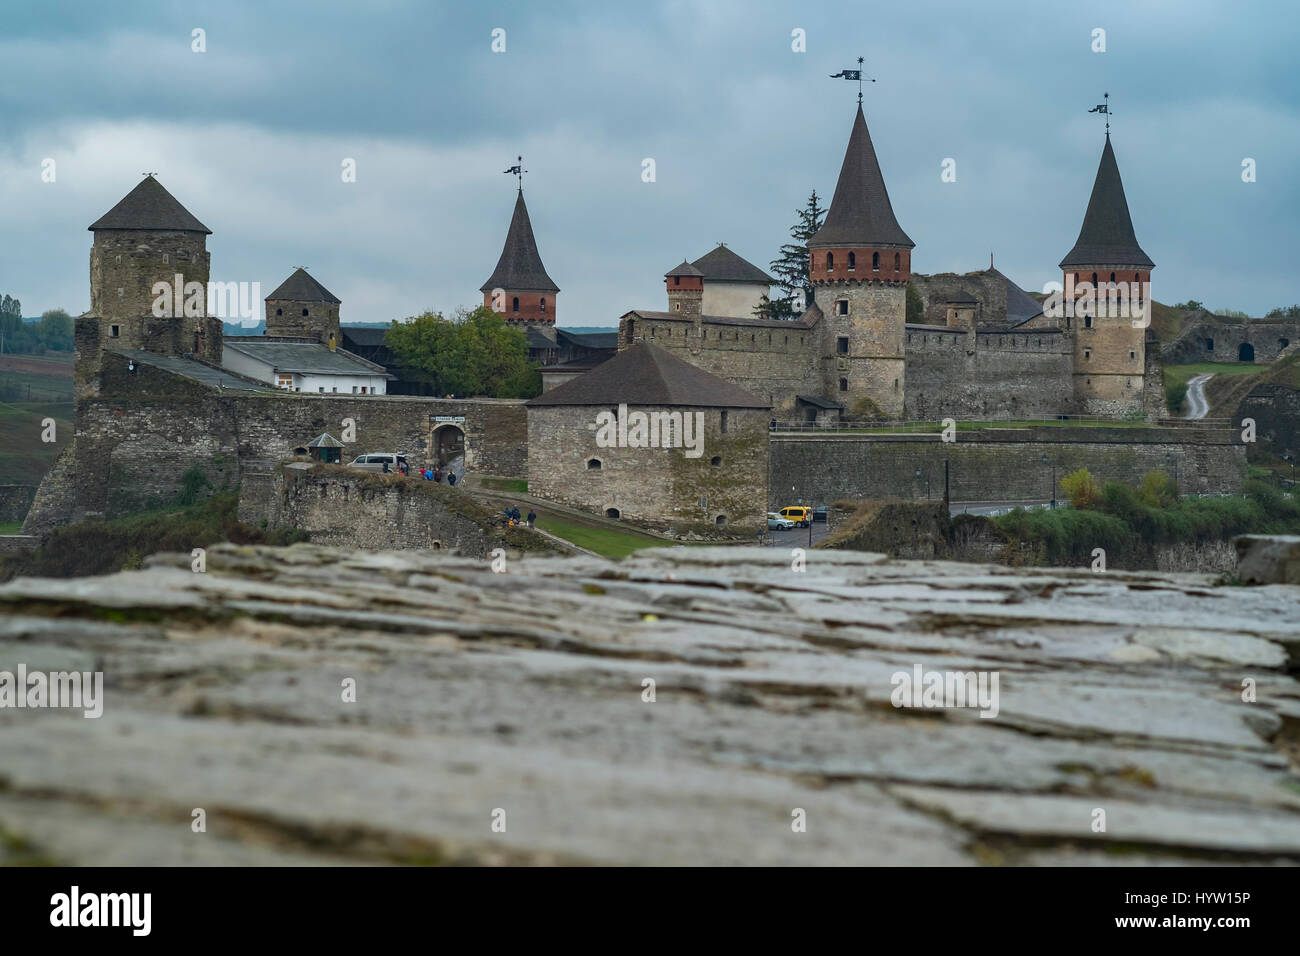 View of the Castle of Kamianets-Podilskyi in Western Ukraine taken on a rainy autumn day. A wall frames the lower part of the image Stock Photo